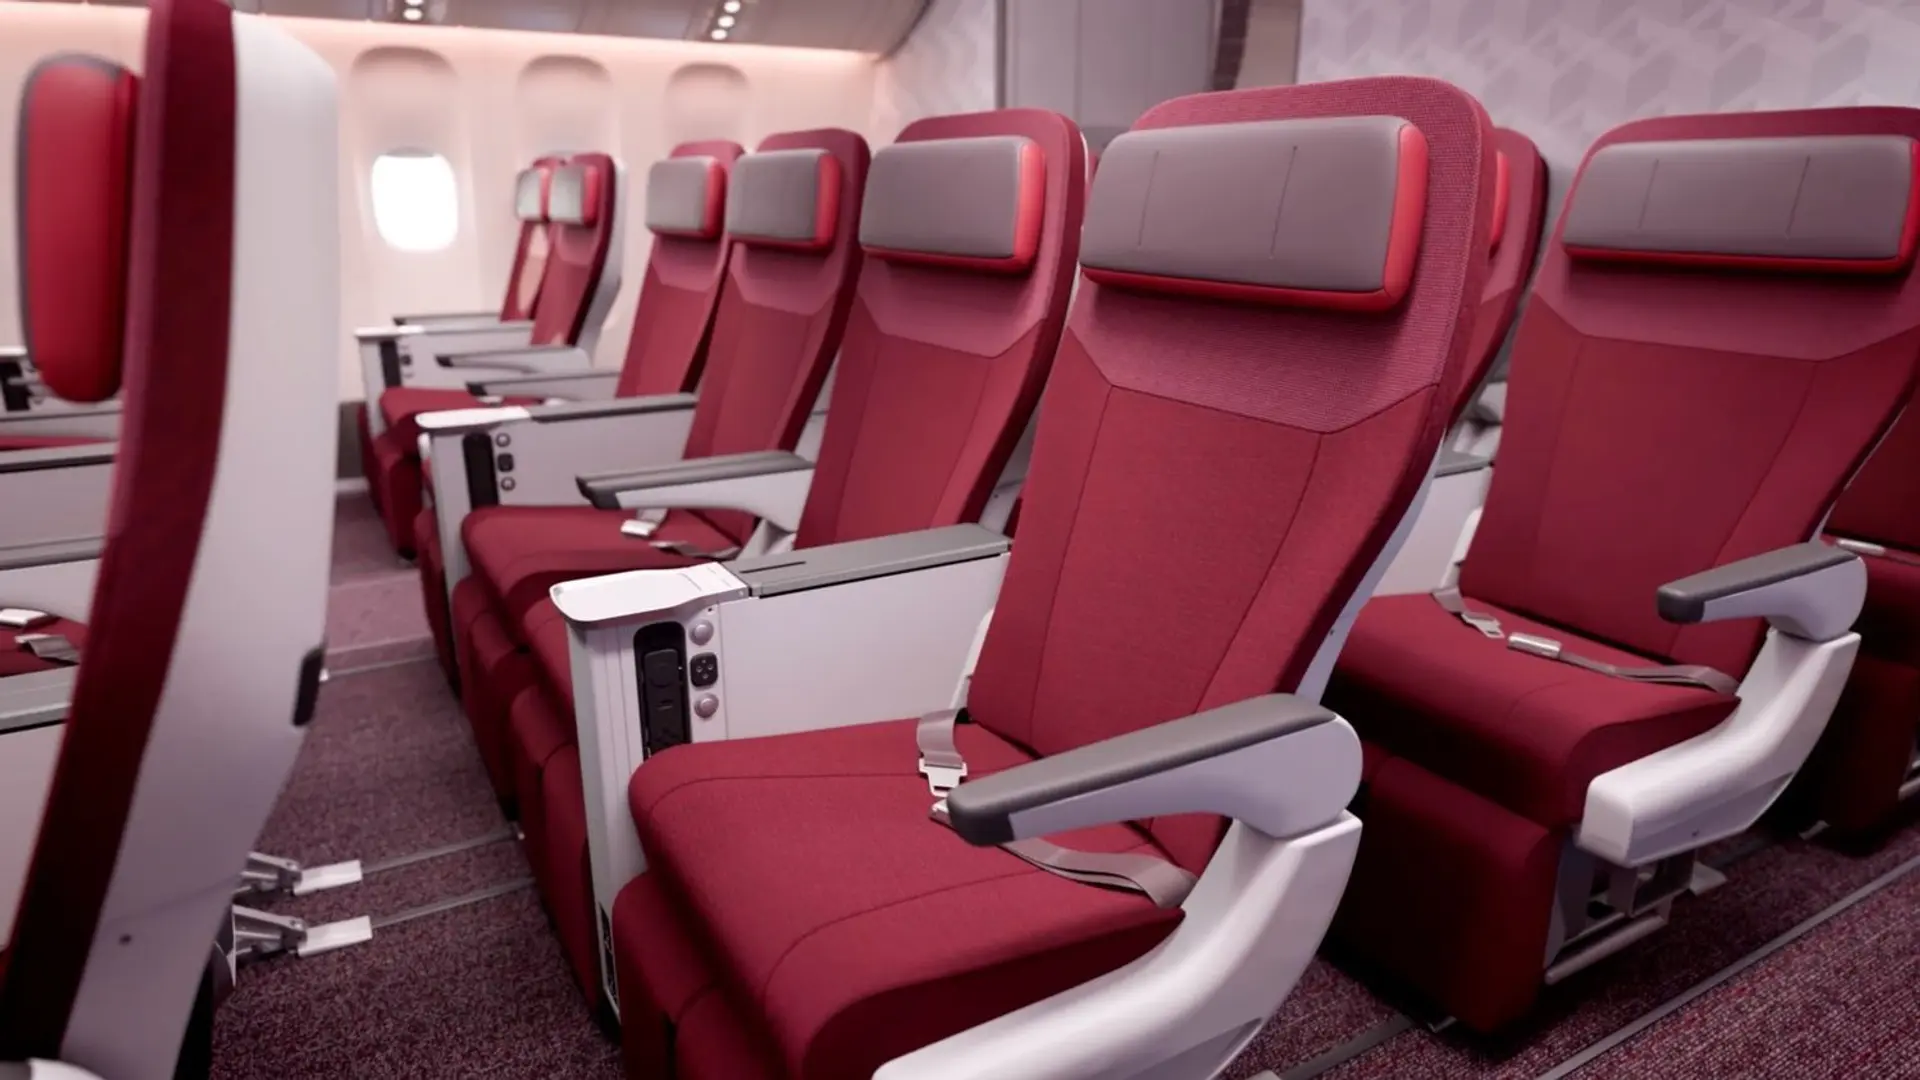 Airlines News - Air India unveils new premium cabins, livery & logo